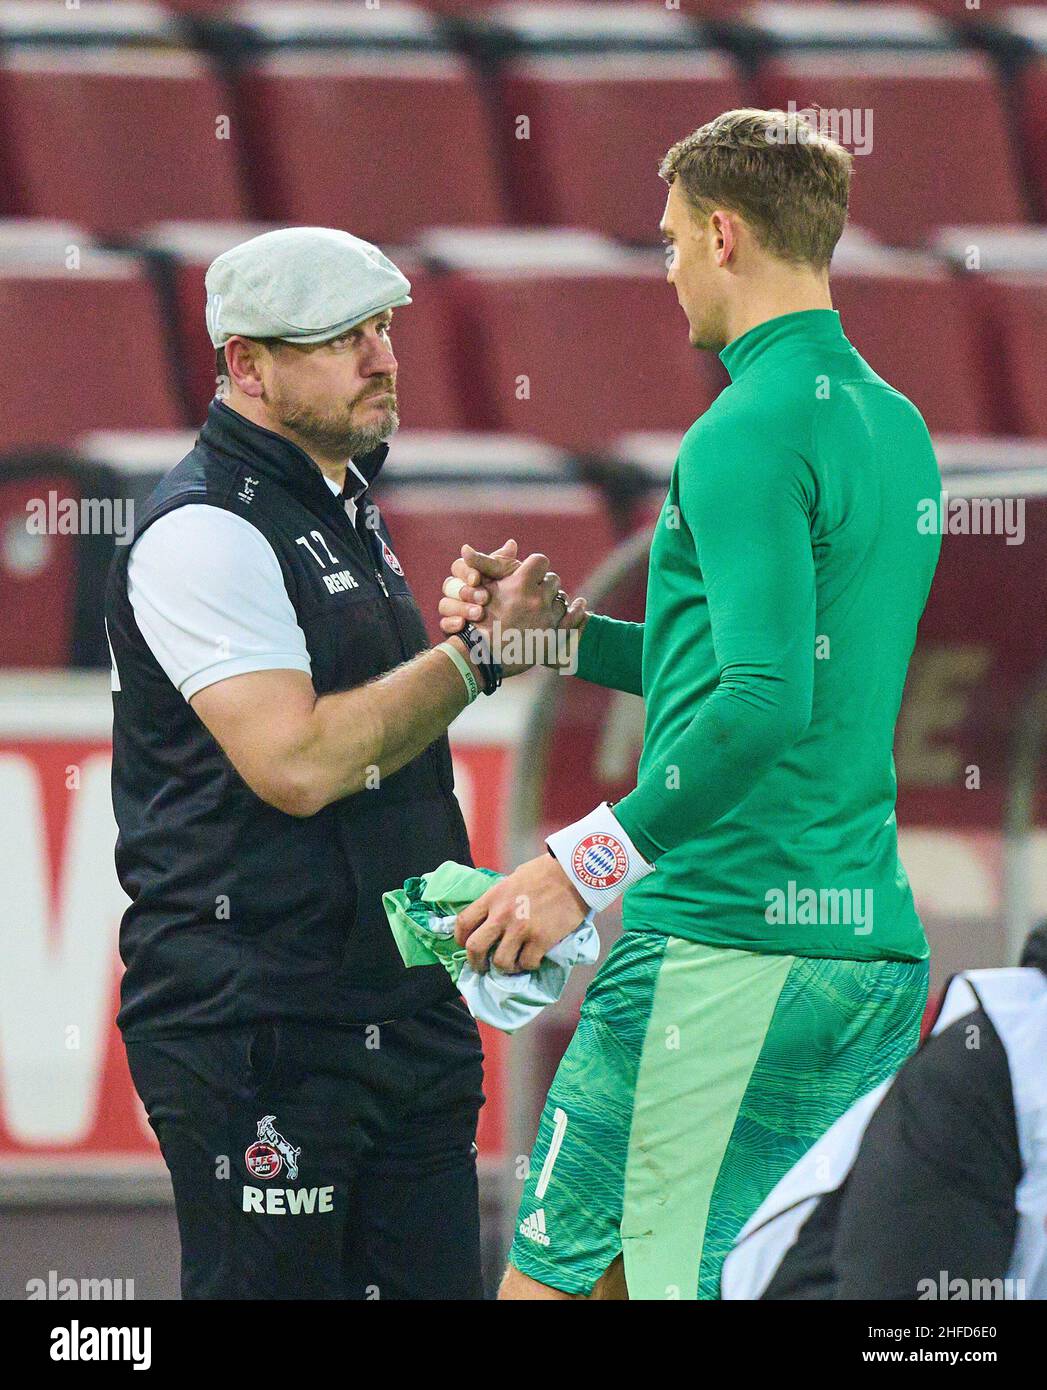 Steffen Baumgart, 1.FCK Trainer and Manuel NEUER, goalkeeper FCB 1 change jersey and cap, Mütze in the match 1.FC KÖLN - FC BAYERN MÜNCHEN 0-4 1.German Football League on Jan 15, 2022 in Cologne, Germany  Season 2021/2022, matchday 19, 1.Bundesliga, 19.Spieltag,  © Peter Schatz / Alamy Live News    - DFL REGULATIONS PROHIBIT ANY USE OF PHOTOGRAPHS as IMAGE SEQUENCES and/or QUASI-VIDEO - Stock Photo